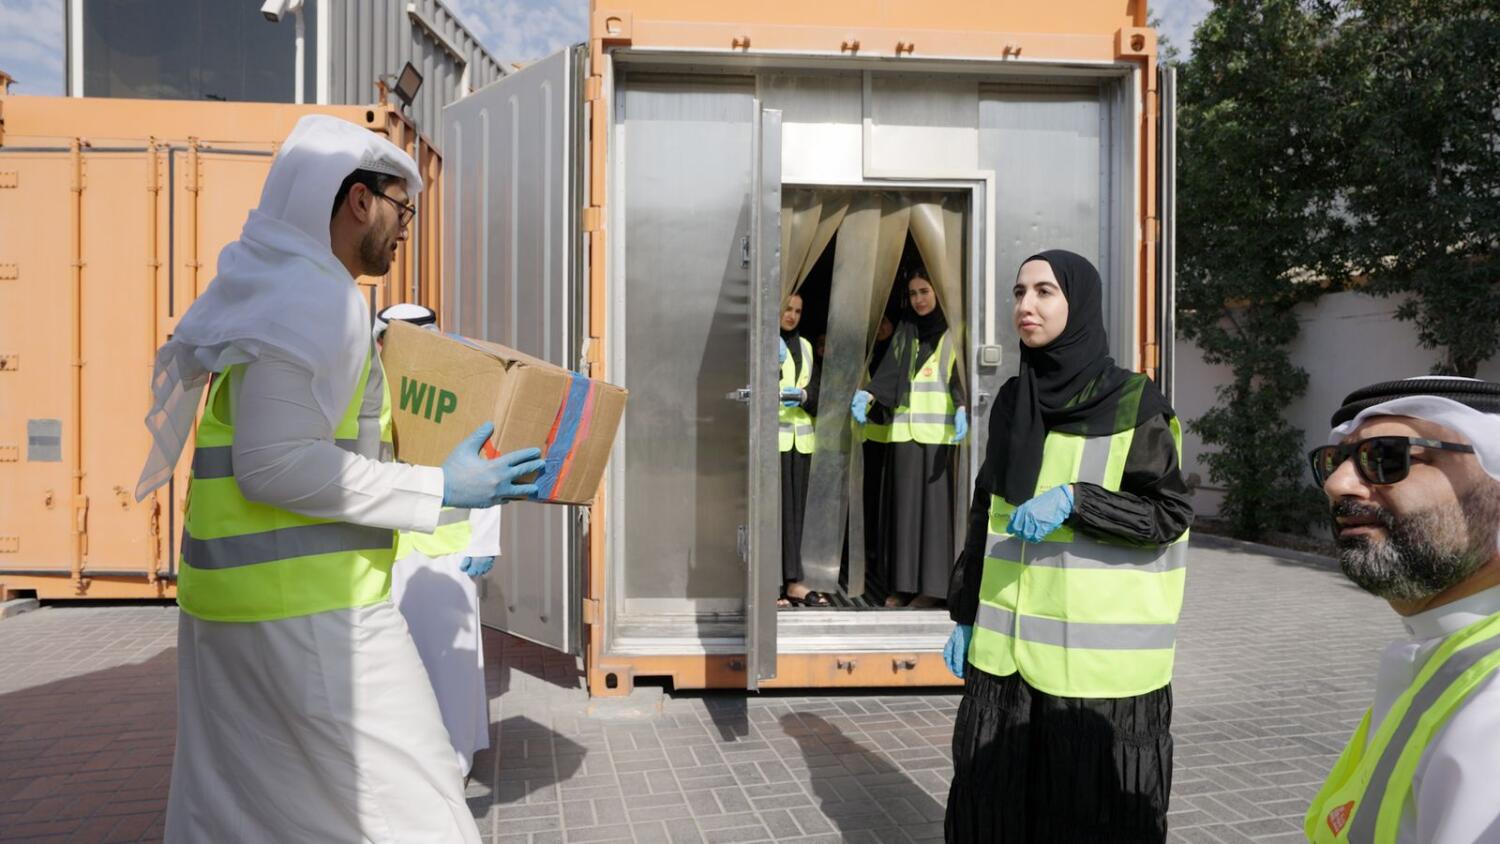 UAE Food Bank launches initiative to distribute 3 million meals, achieve zero food waste during Ramadan